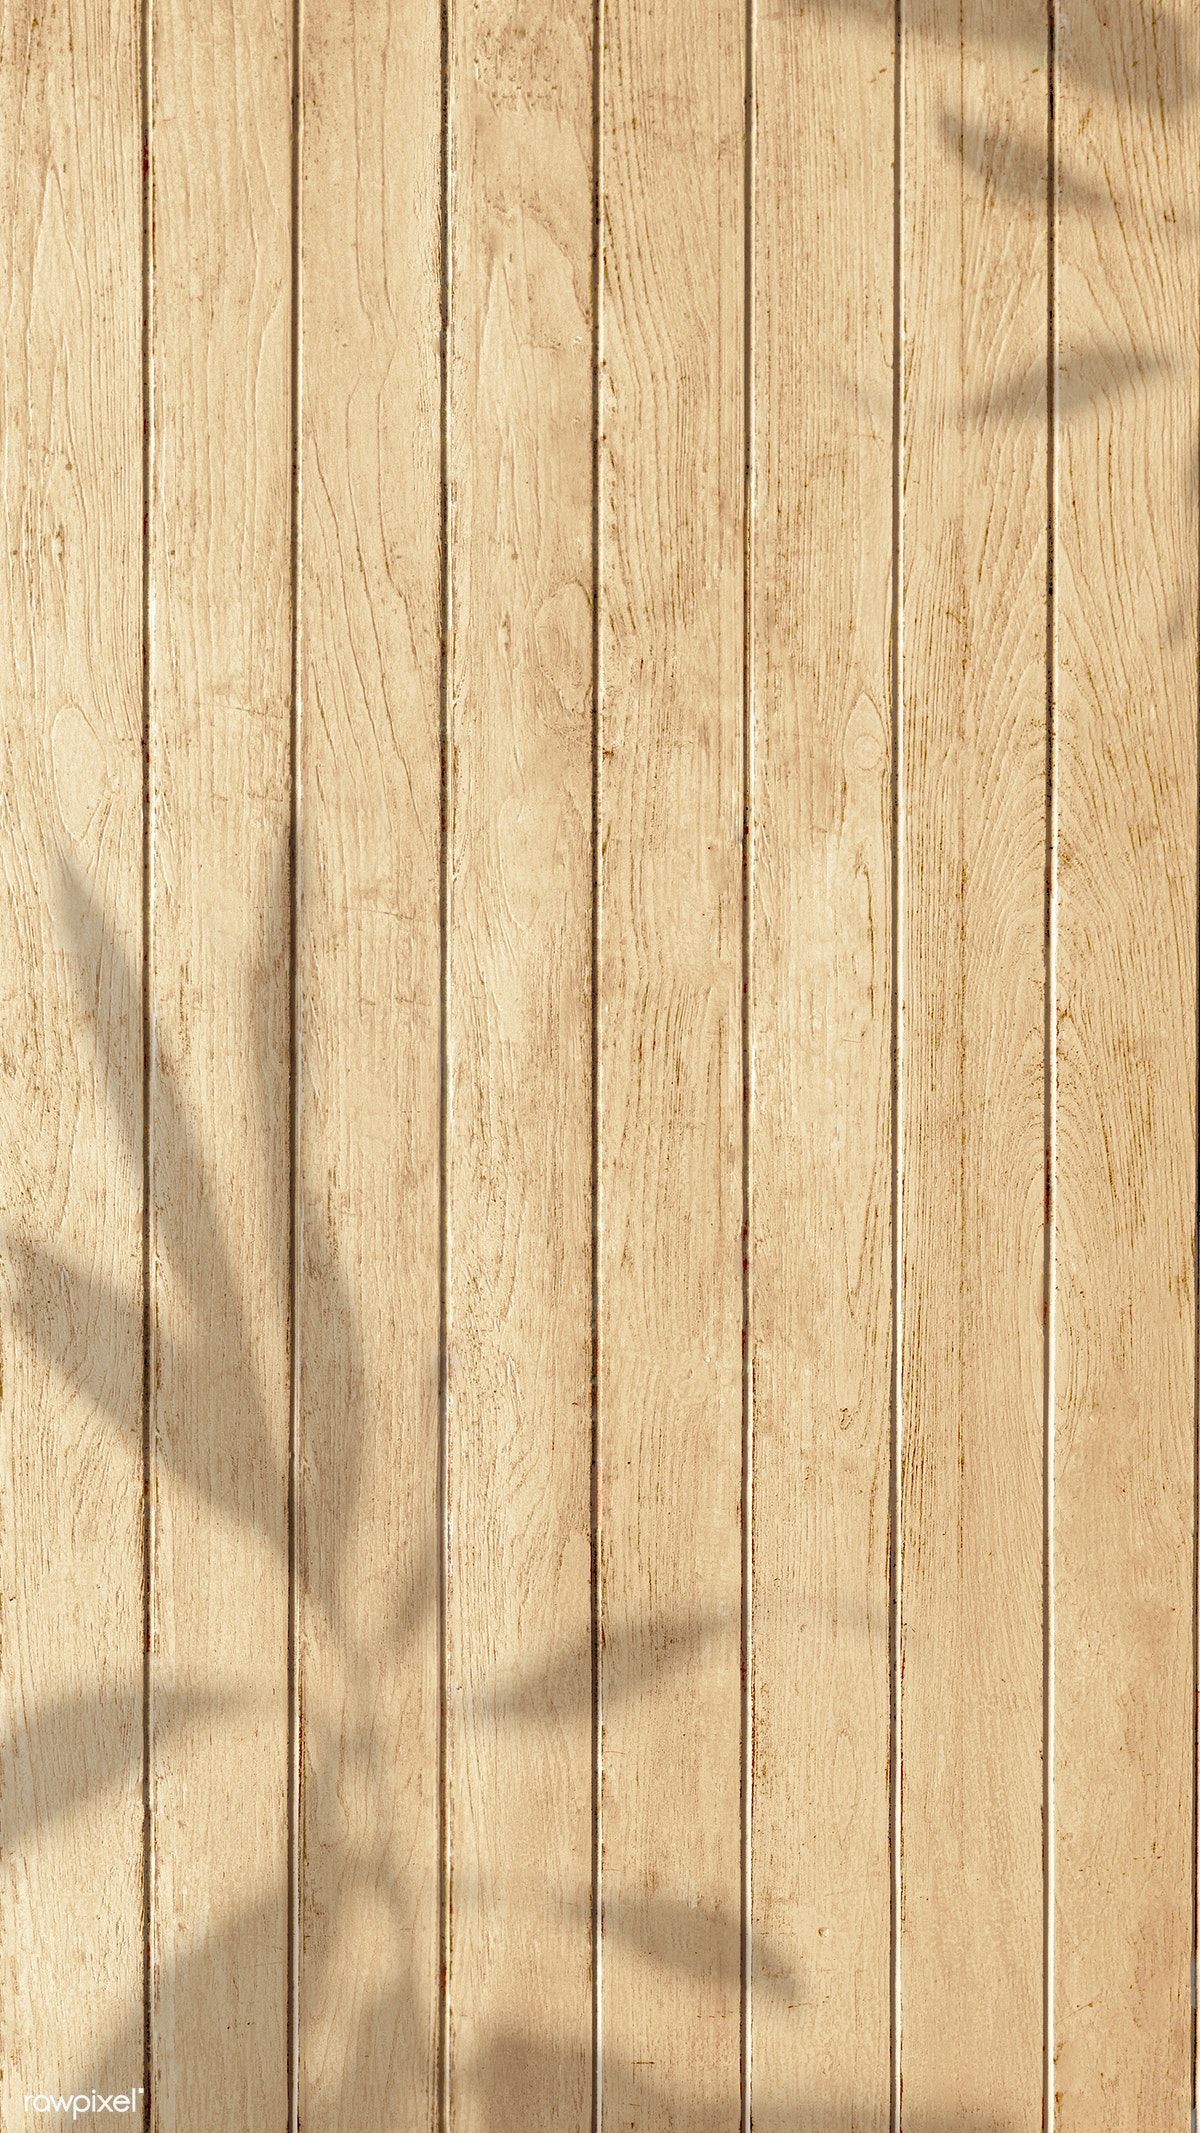 Download premium psd of Wooden planks with a shadow - Woods